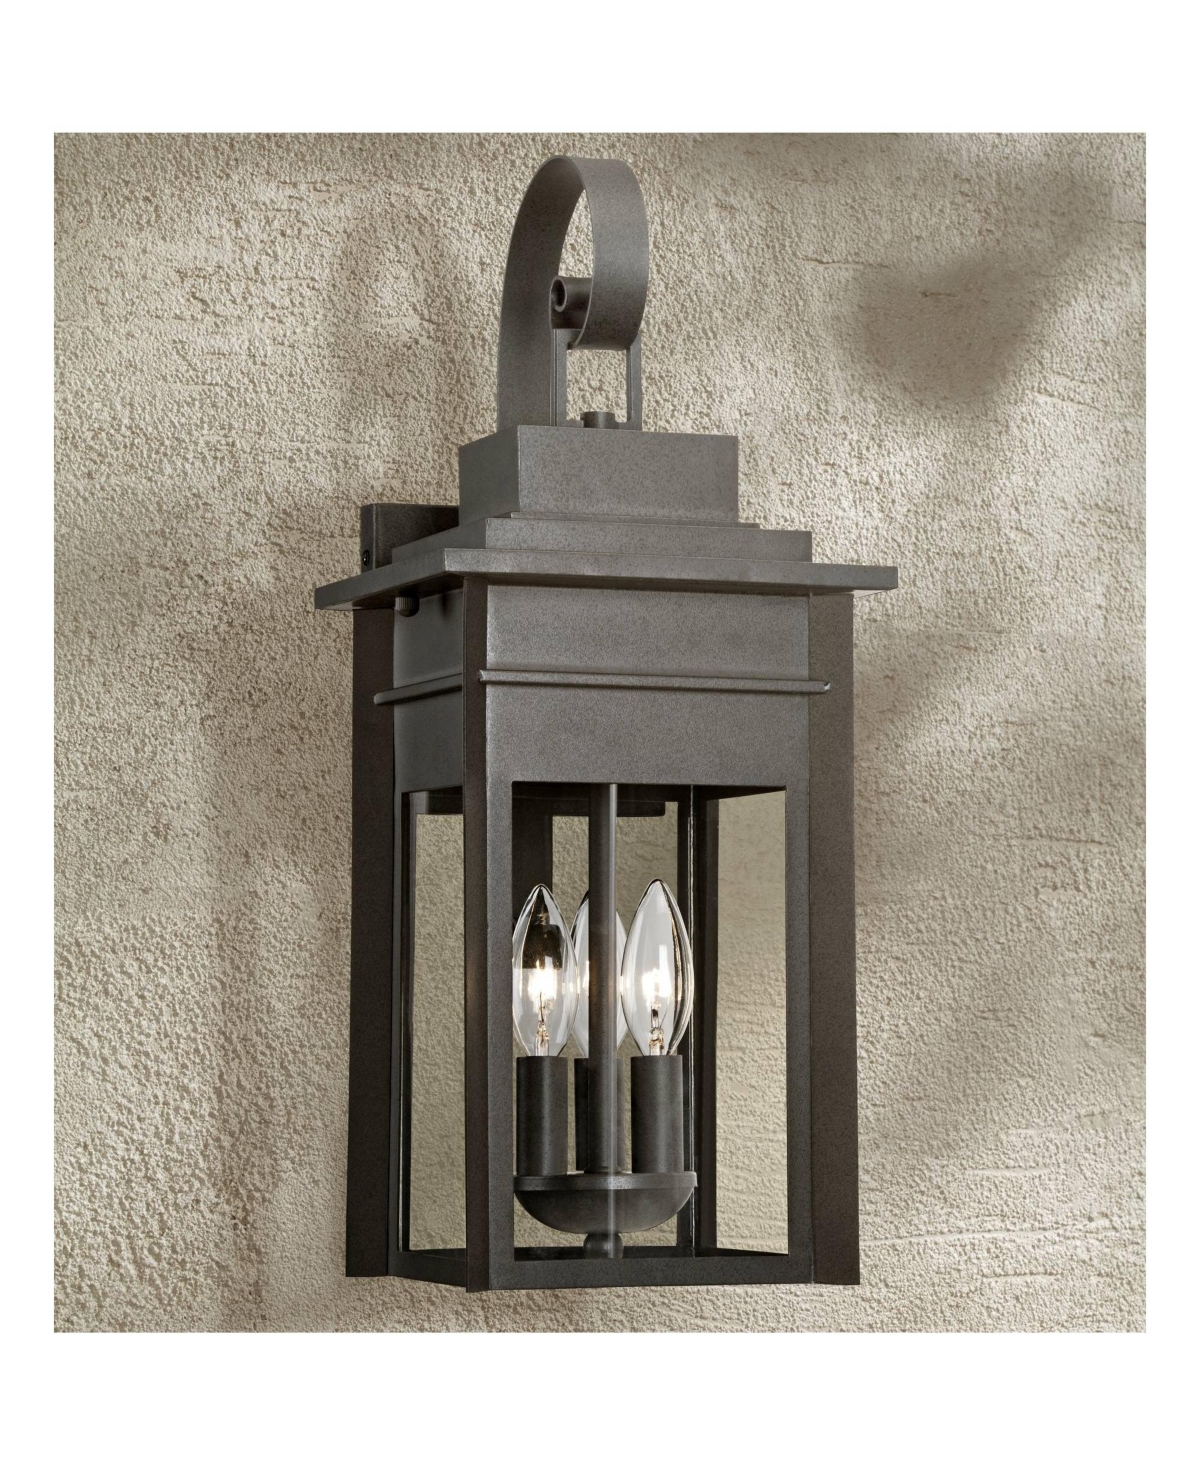 Bransford Traditional Outdoor Wall Light Fixture Dark Black Specked Gray 19" Clear Glass Lantern Scroll Arm for Exterior House Porch Patio Outside Dec